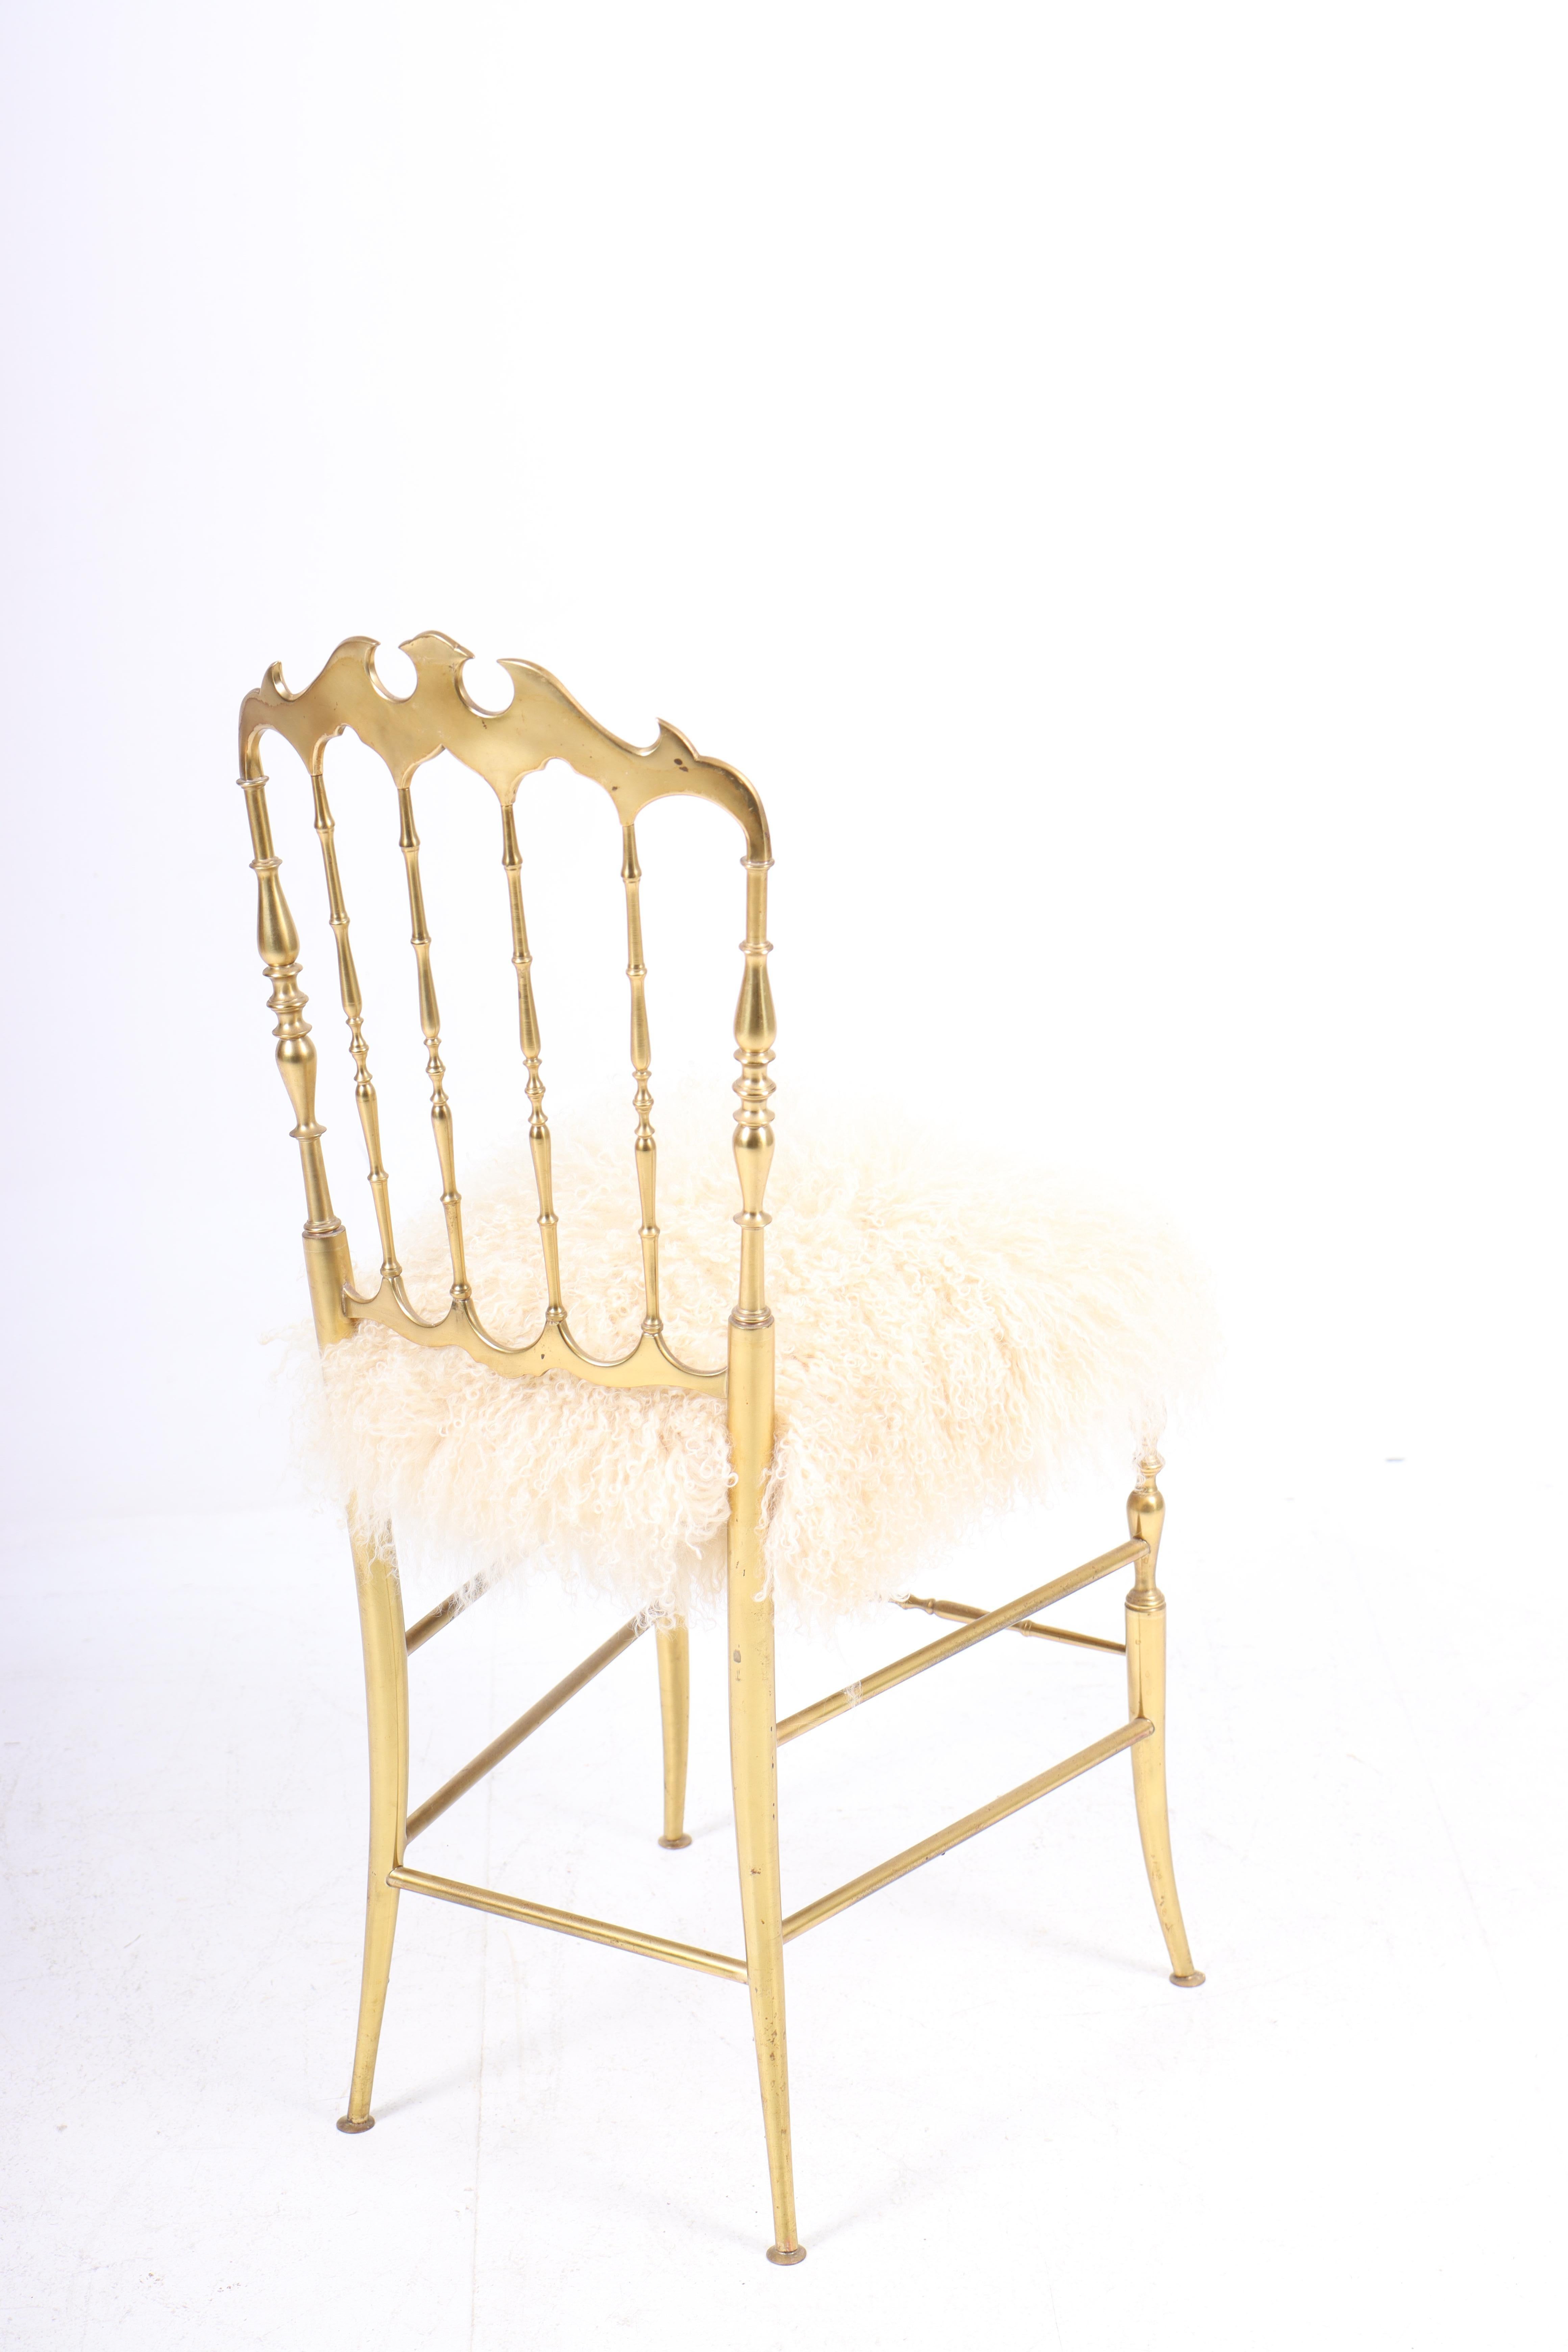 Italian Mid-Century Side Chair in Brass and Sheepskin, Made in Italy, 1950s For Sale